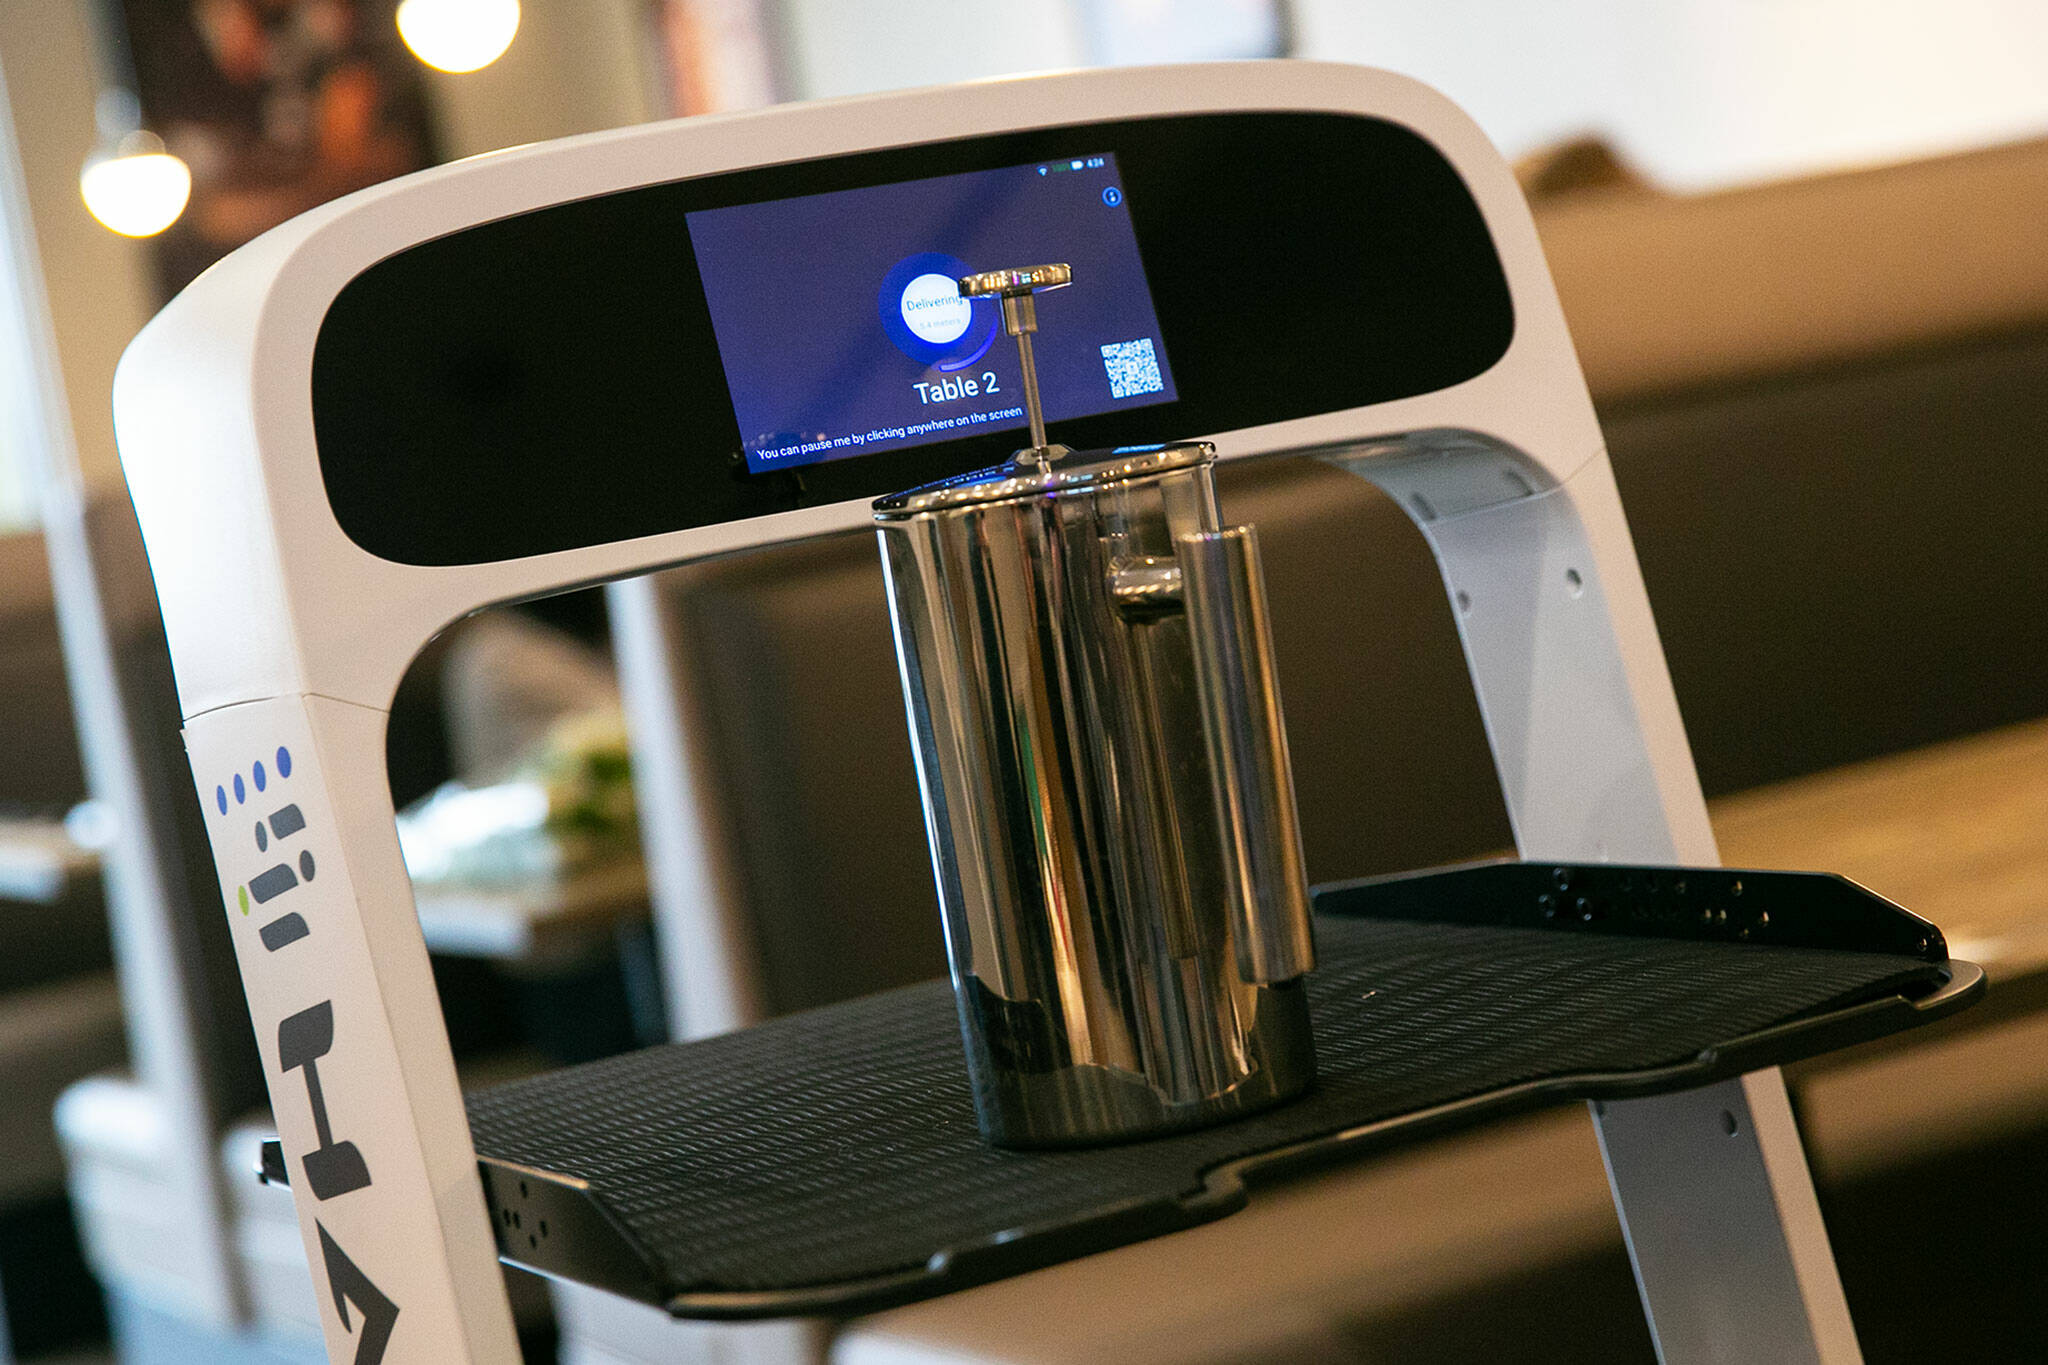 Peanut the server robot takes a tea press to table 2 while serving tables at Sushi Hana on Jan. 5, in Lynnwood. (Ryan Berry / The Herald)